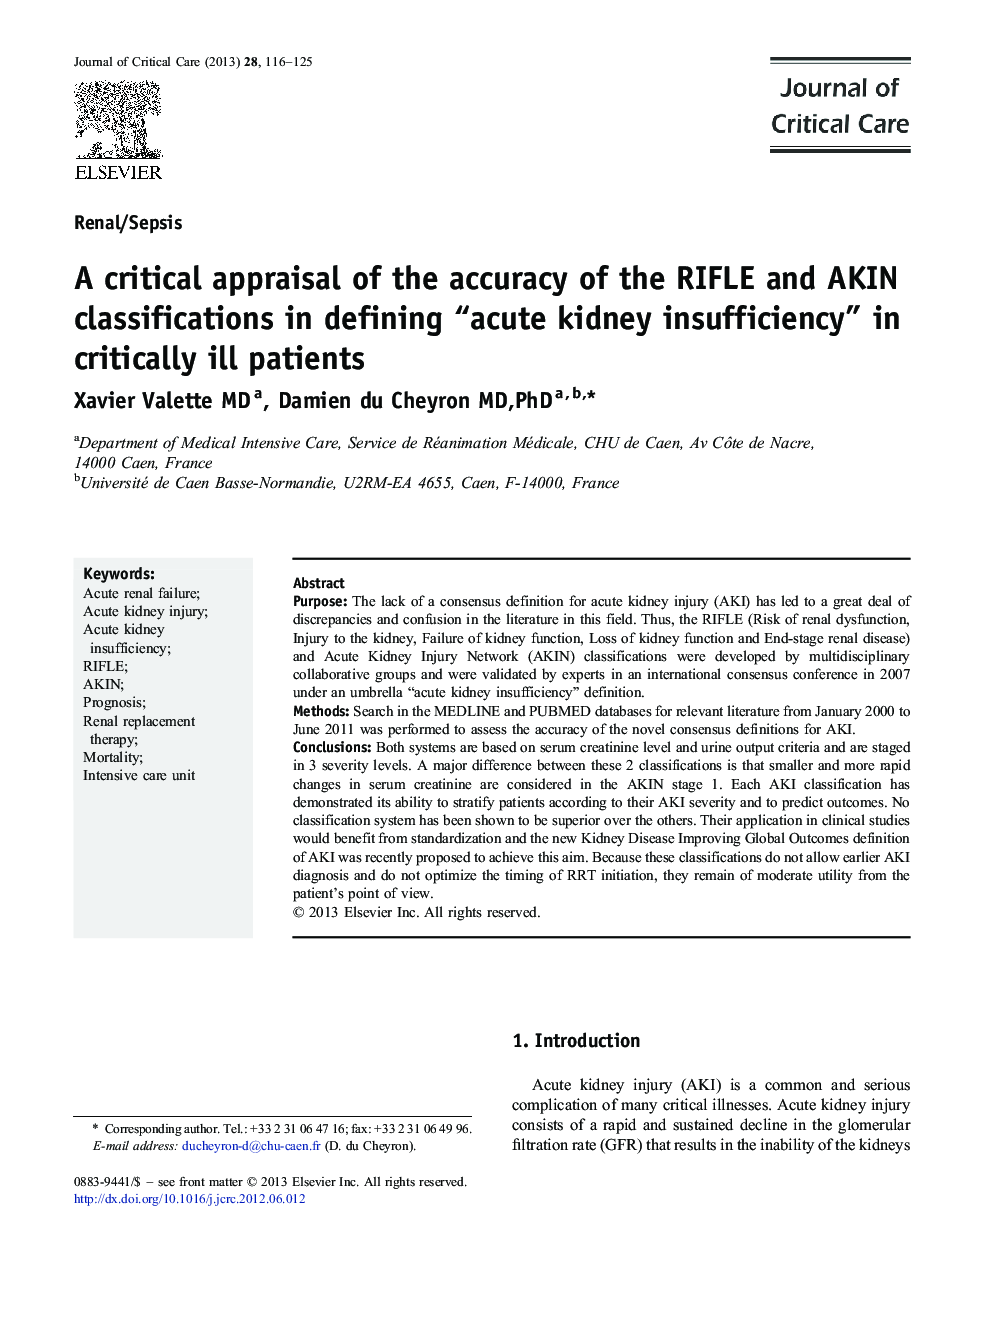 A critical appraisal of the accuracy of the RIFLE and AKIN classifications in defining “acute kidney insufficiency” in critically ill patients